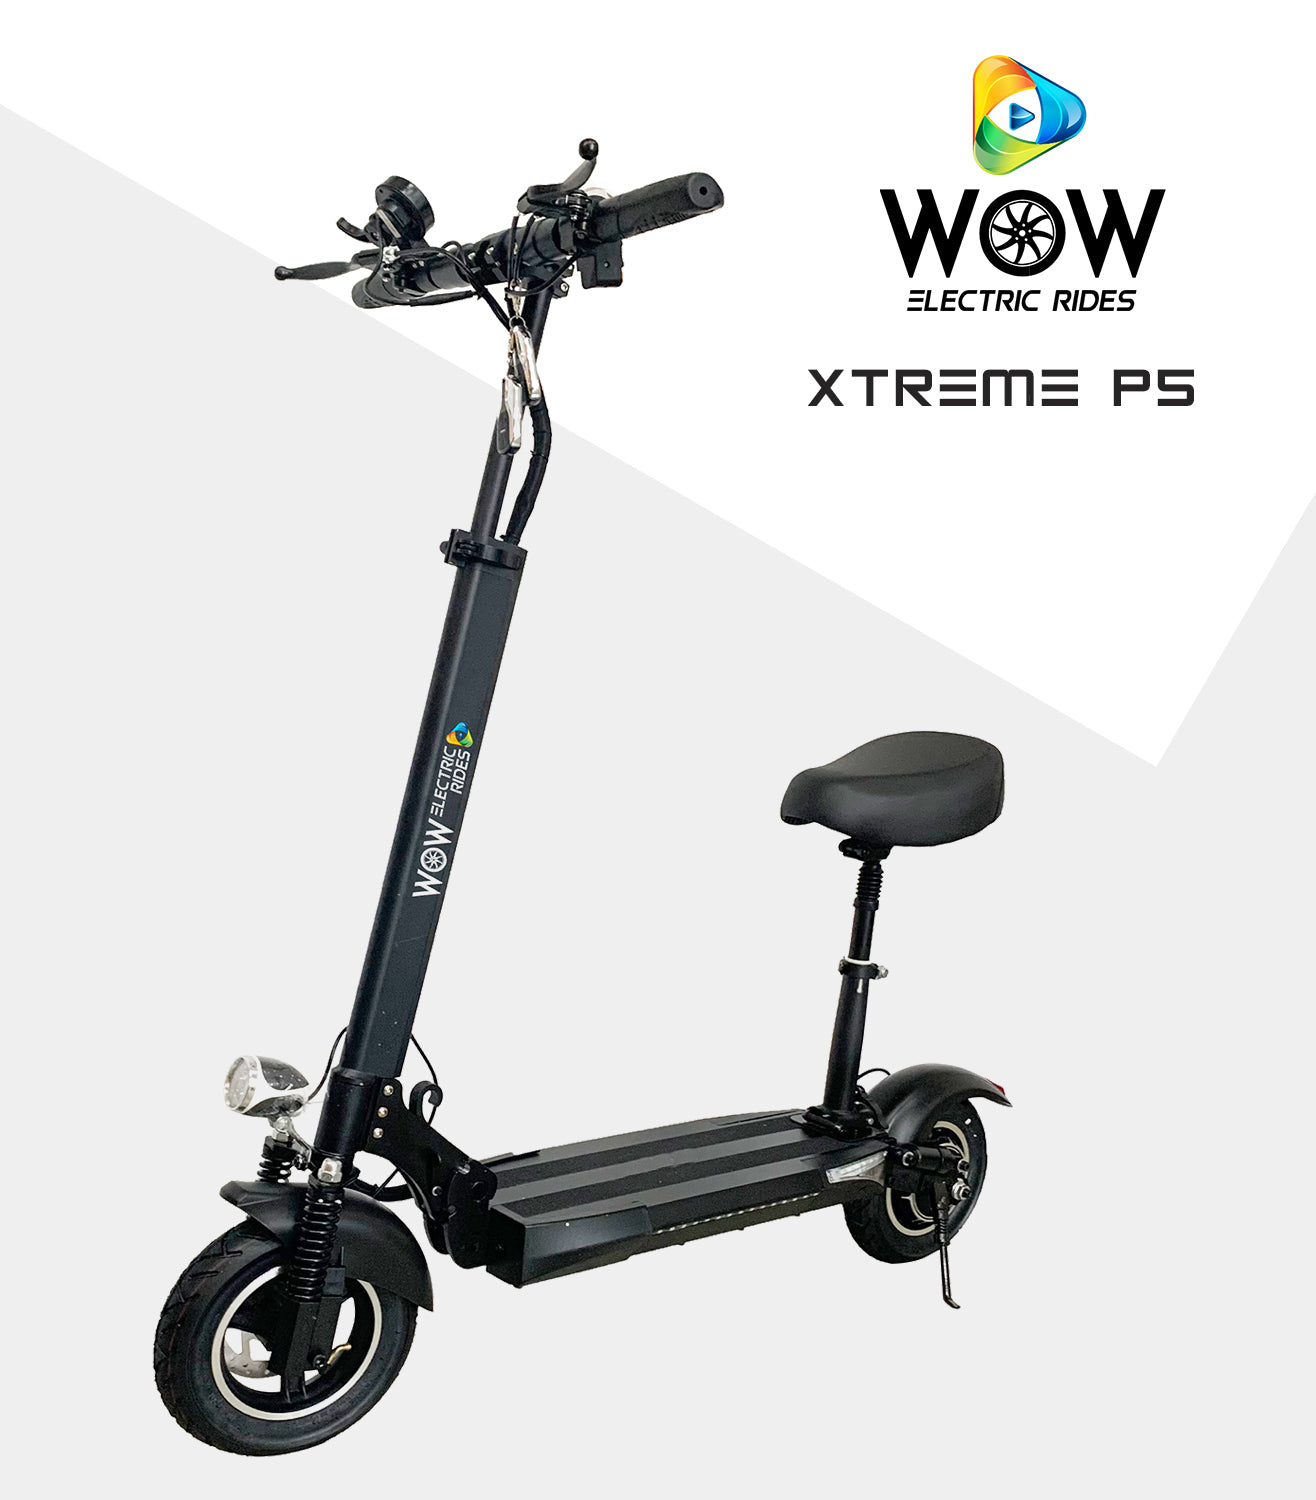 WOW XTreme Motor 500w - Battery 48V, 13Ah – WOW Technologies / WOW Electric Rides